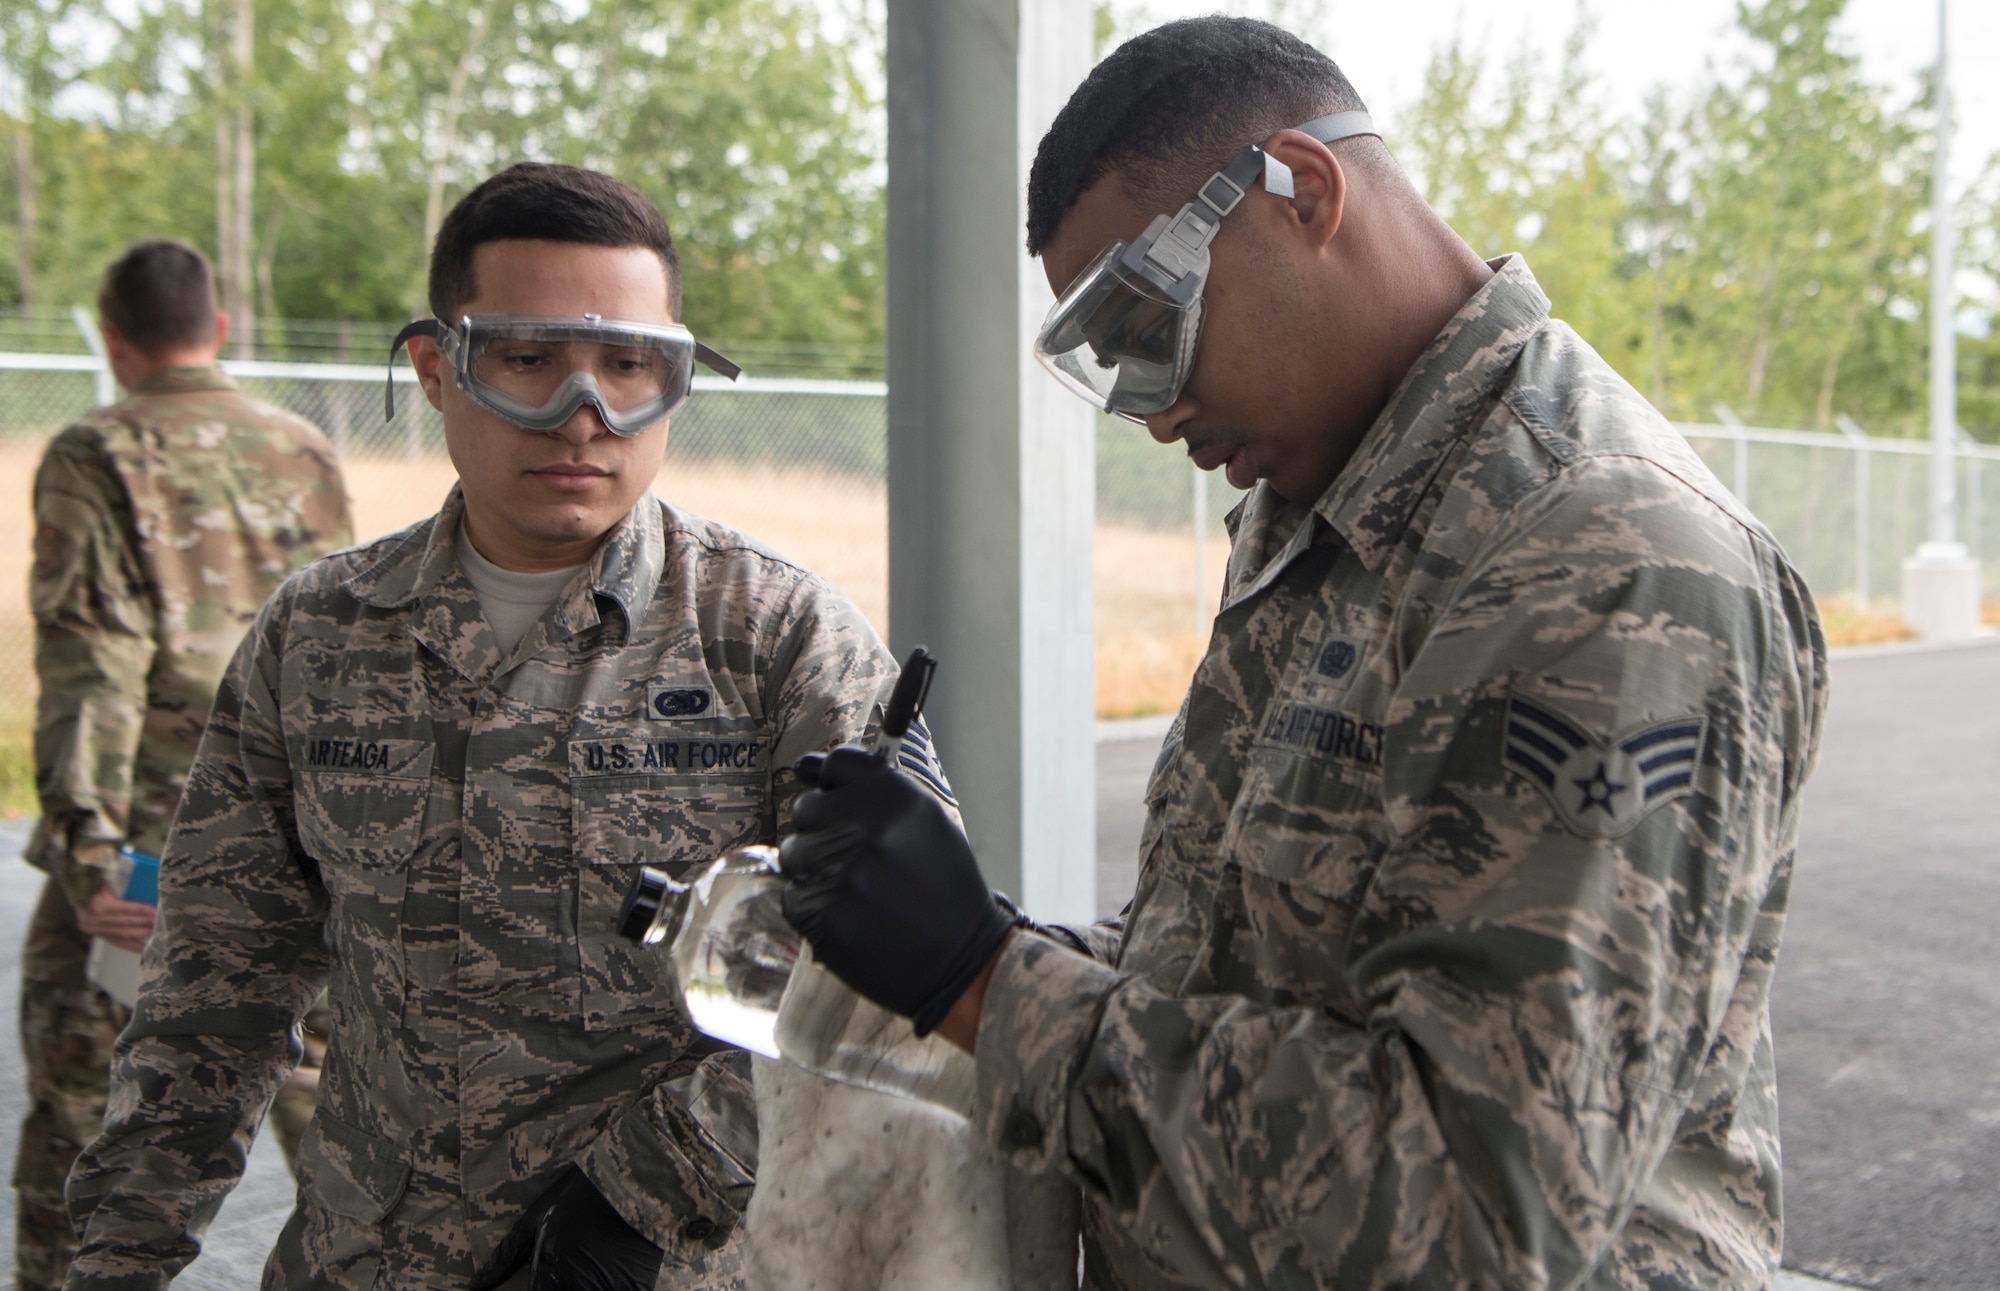 U.S. Air Force Senior Airman Jherron Parks-Harris, a 673d Logistics Readiness Squadron fuels laboratory technician, labels a sample from a tanker truck at a tank truck offload facility on Joint Base Elmendorf-Richardson, Alaska, July 25, 2019. The TTOF became fully operational December 2018, and provides a secondary means to receive JP-8 (Jet Propellant 8) in the event JBER’s fuel pipelines are out of service due to maintenance, damage or natural disaster.